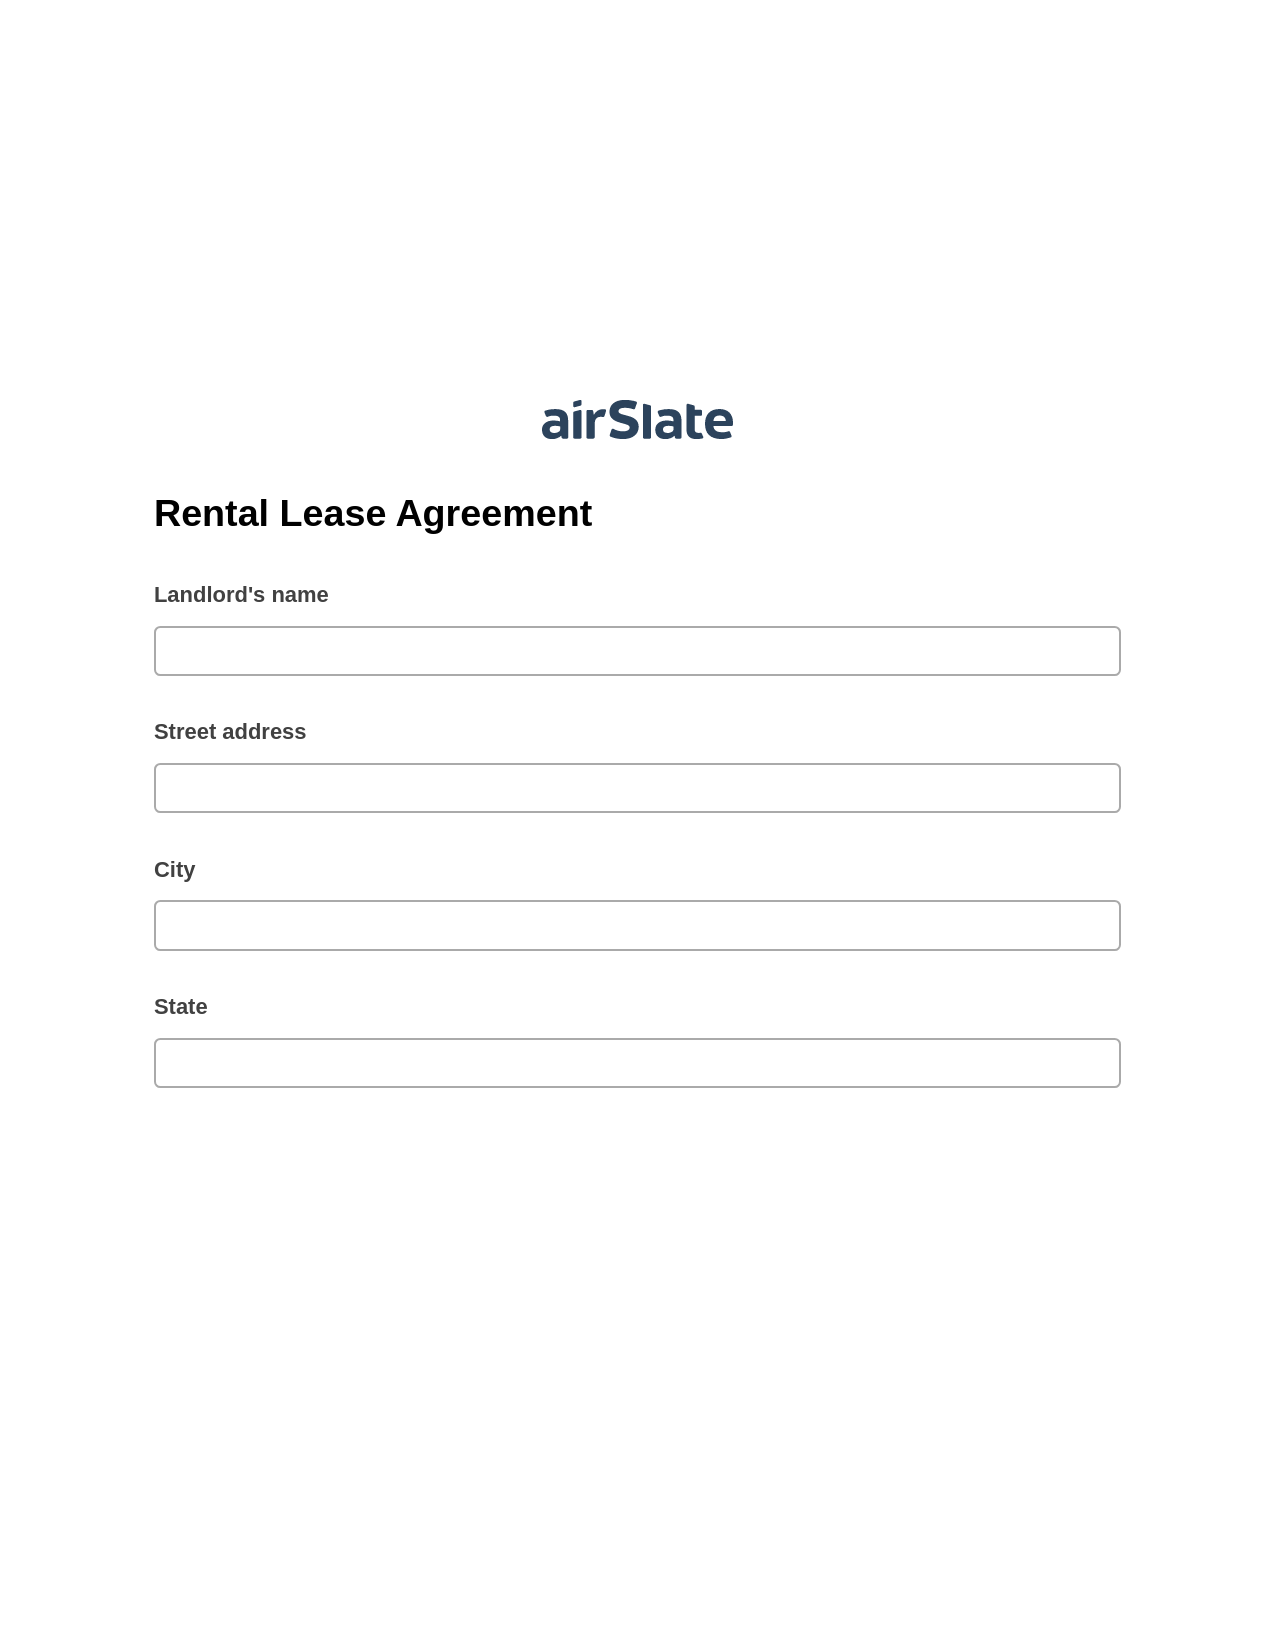 Rental Lease Agreement Pre-fill from Salesforce Record Bot, Create NetSuite Records Bot, Export to Smartsheet